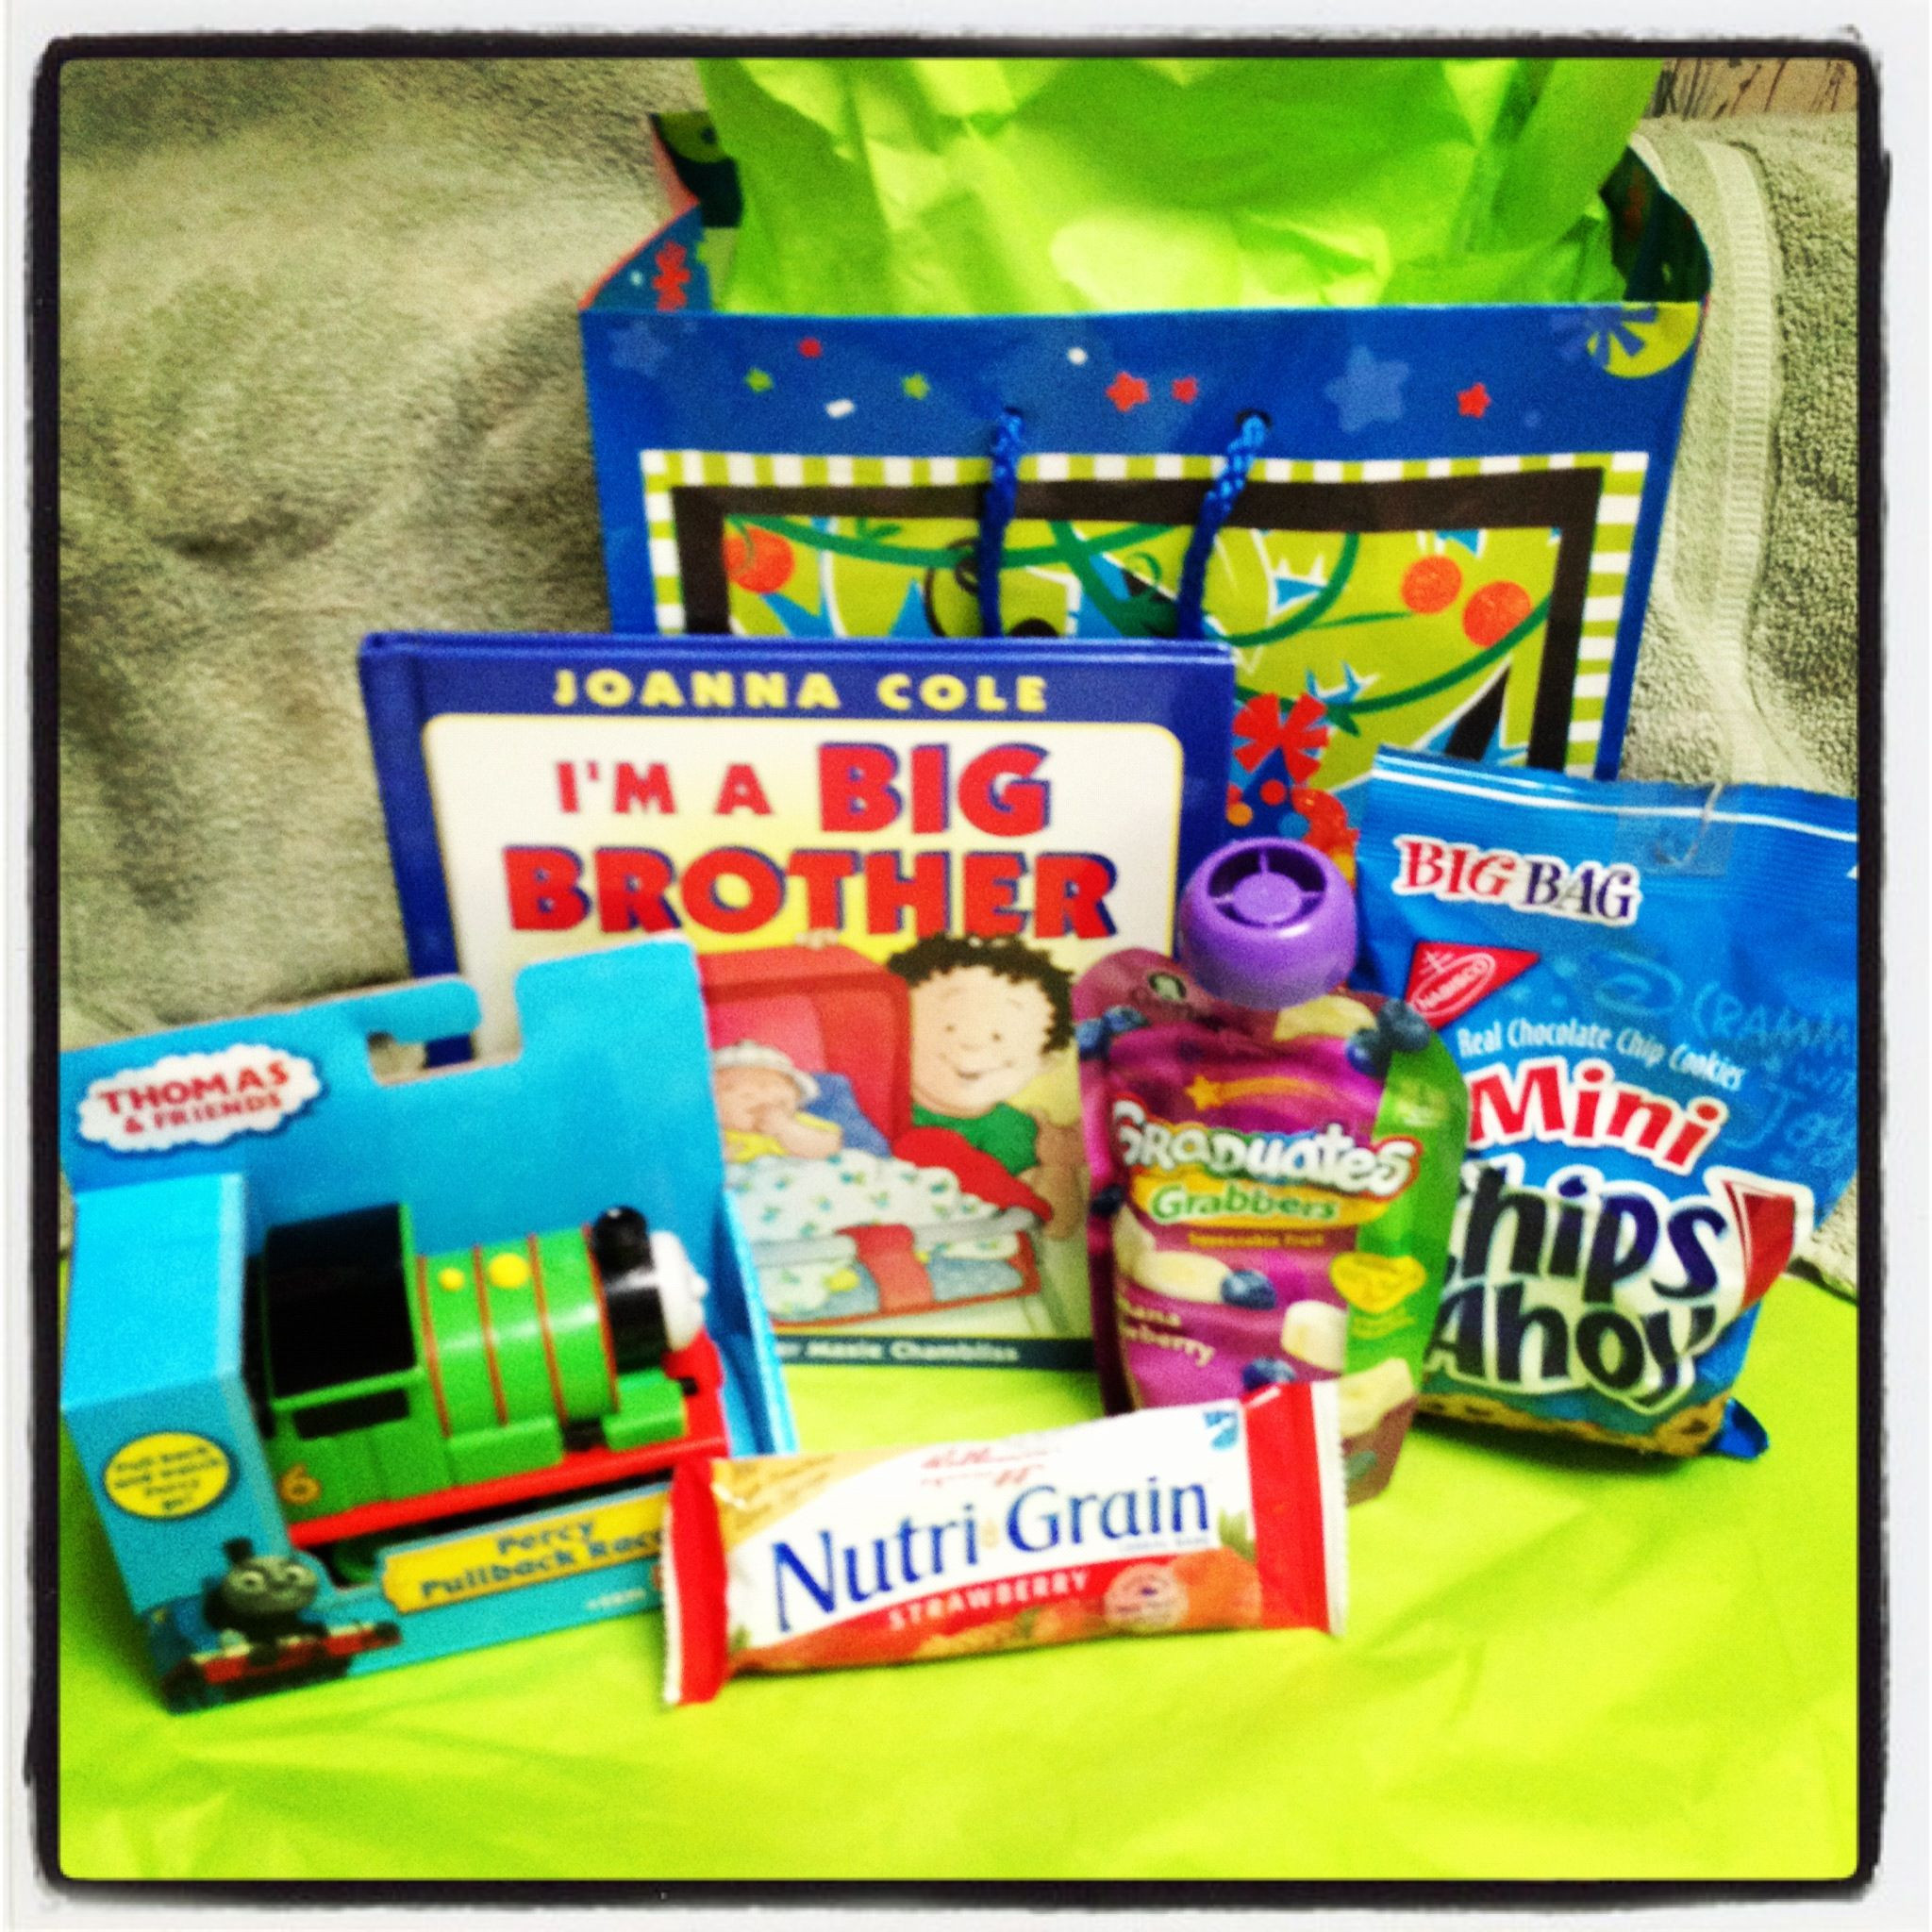 Baby Brother Gifts
 Big brother t from baby big brother book Thomas